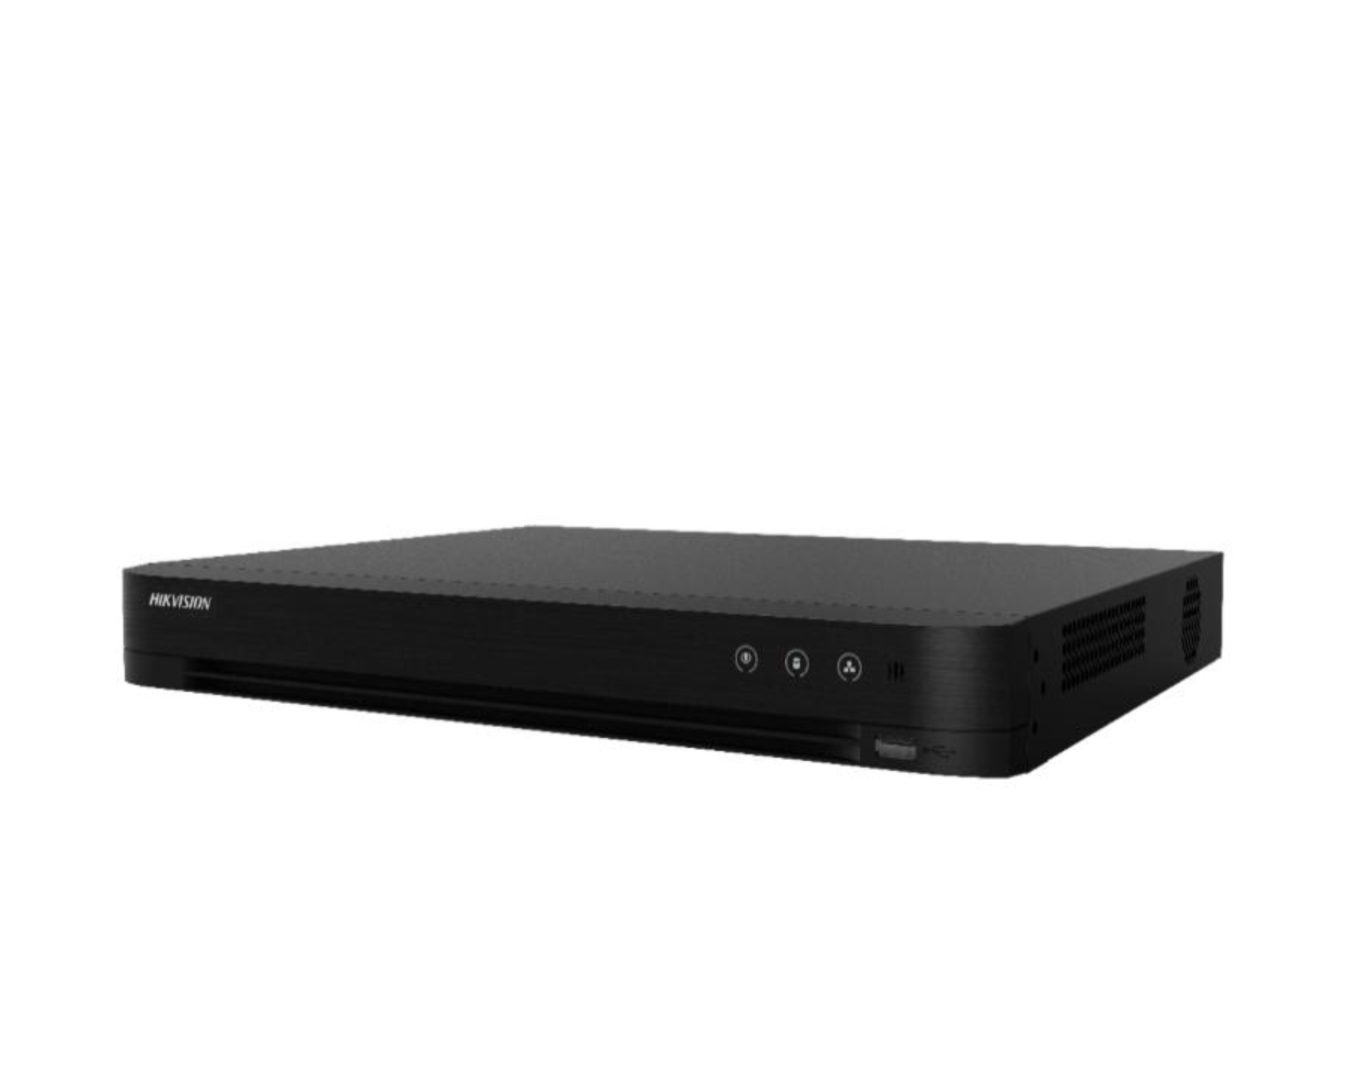 DVR HIKVISION iDS-7208HUHI-M2/S 8 channels and 2 HDDs 1U AcuSense Deep learning-based motion detection 2.0 is enabled by default for all analog channels, it can classify human and vehicle, and extremely reduce false alarms caused by objects like leaves and lights;Quick search by object or event type